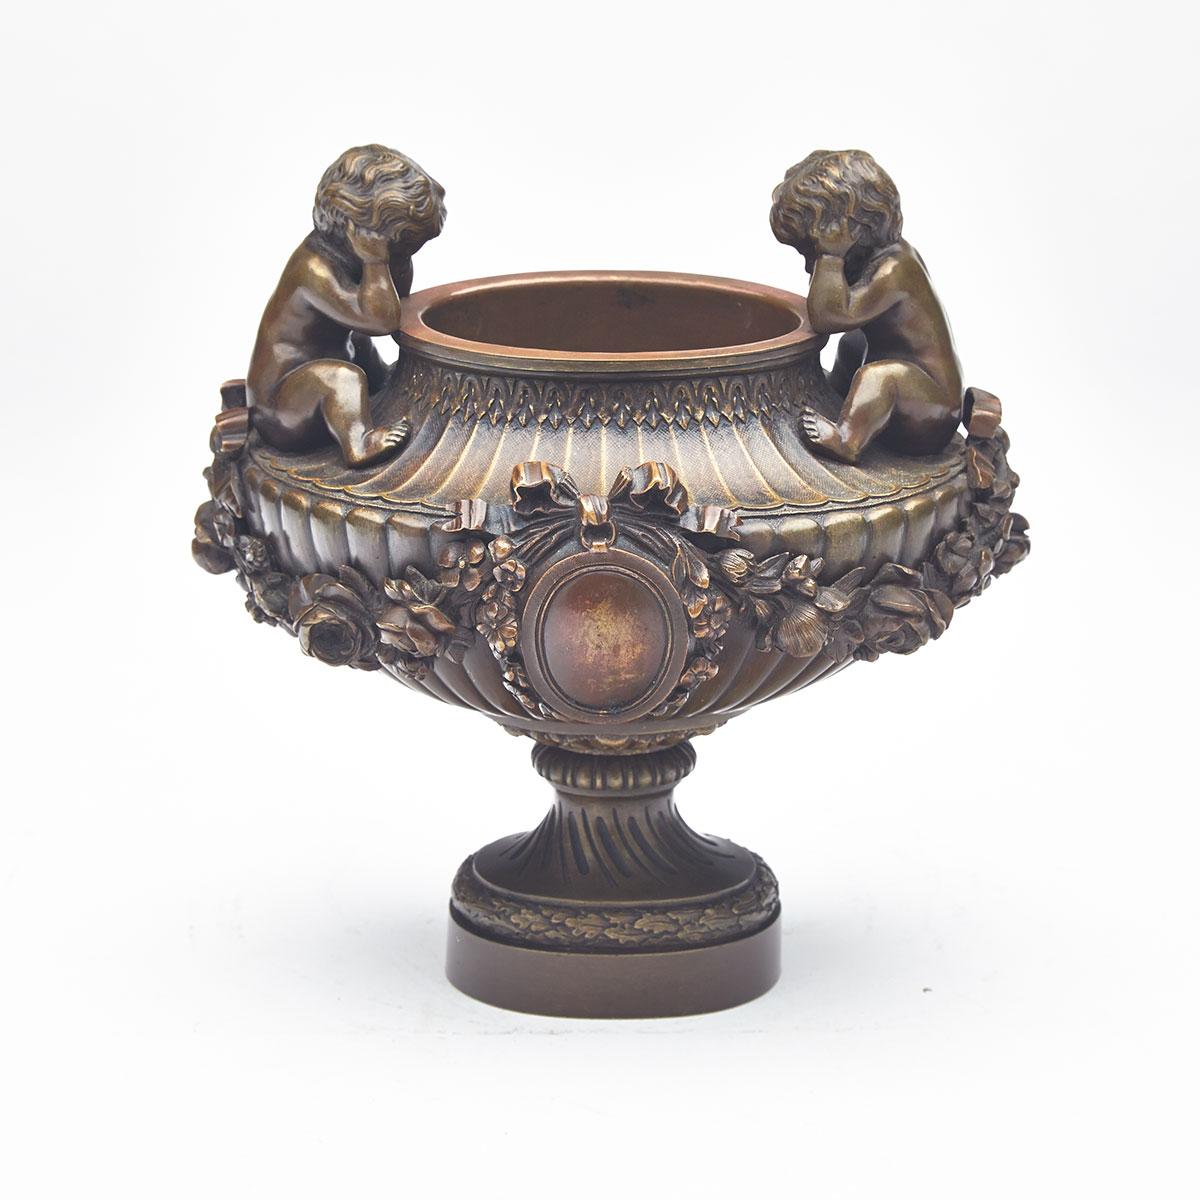 French Patinated Bronze Mantel Urn, 19th century